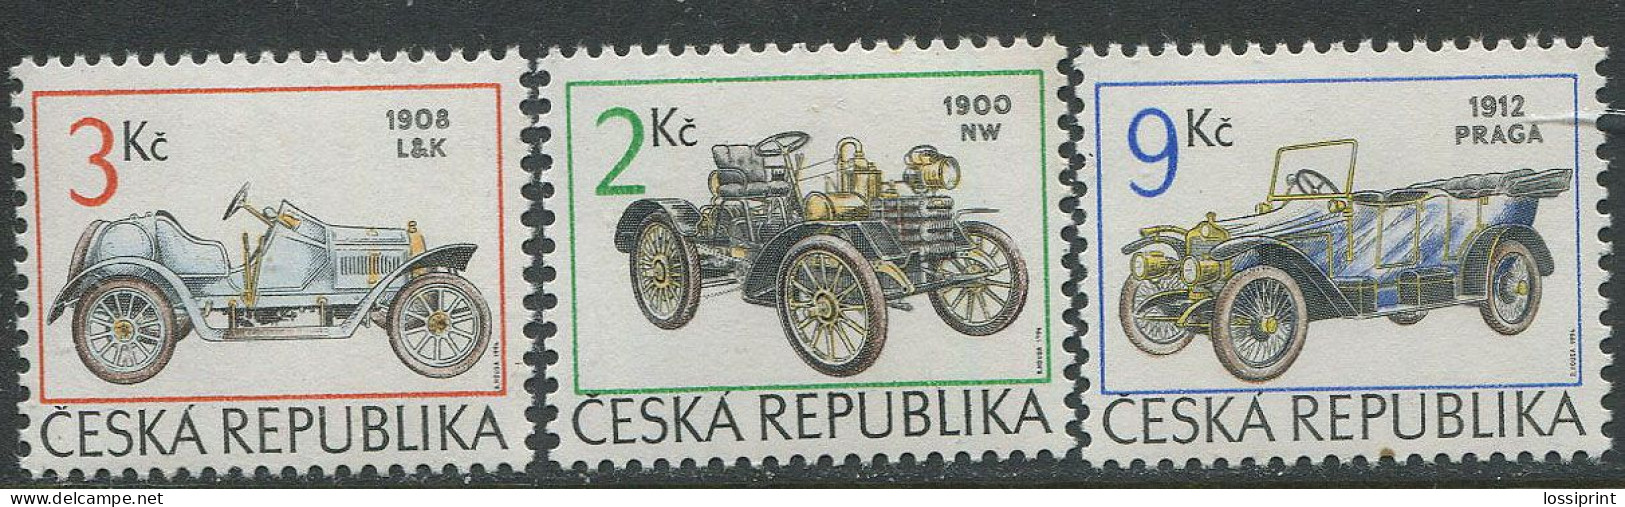 Czech:Unused Stamps Old Cars, 1994, MNH - Cars